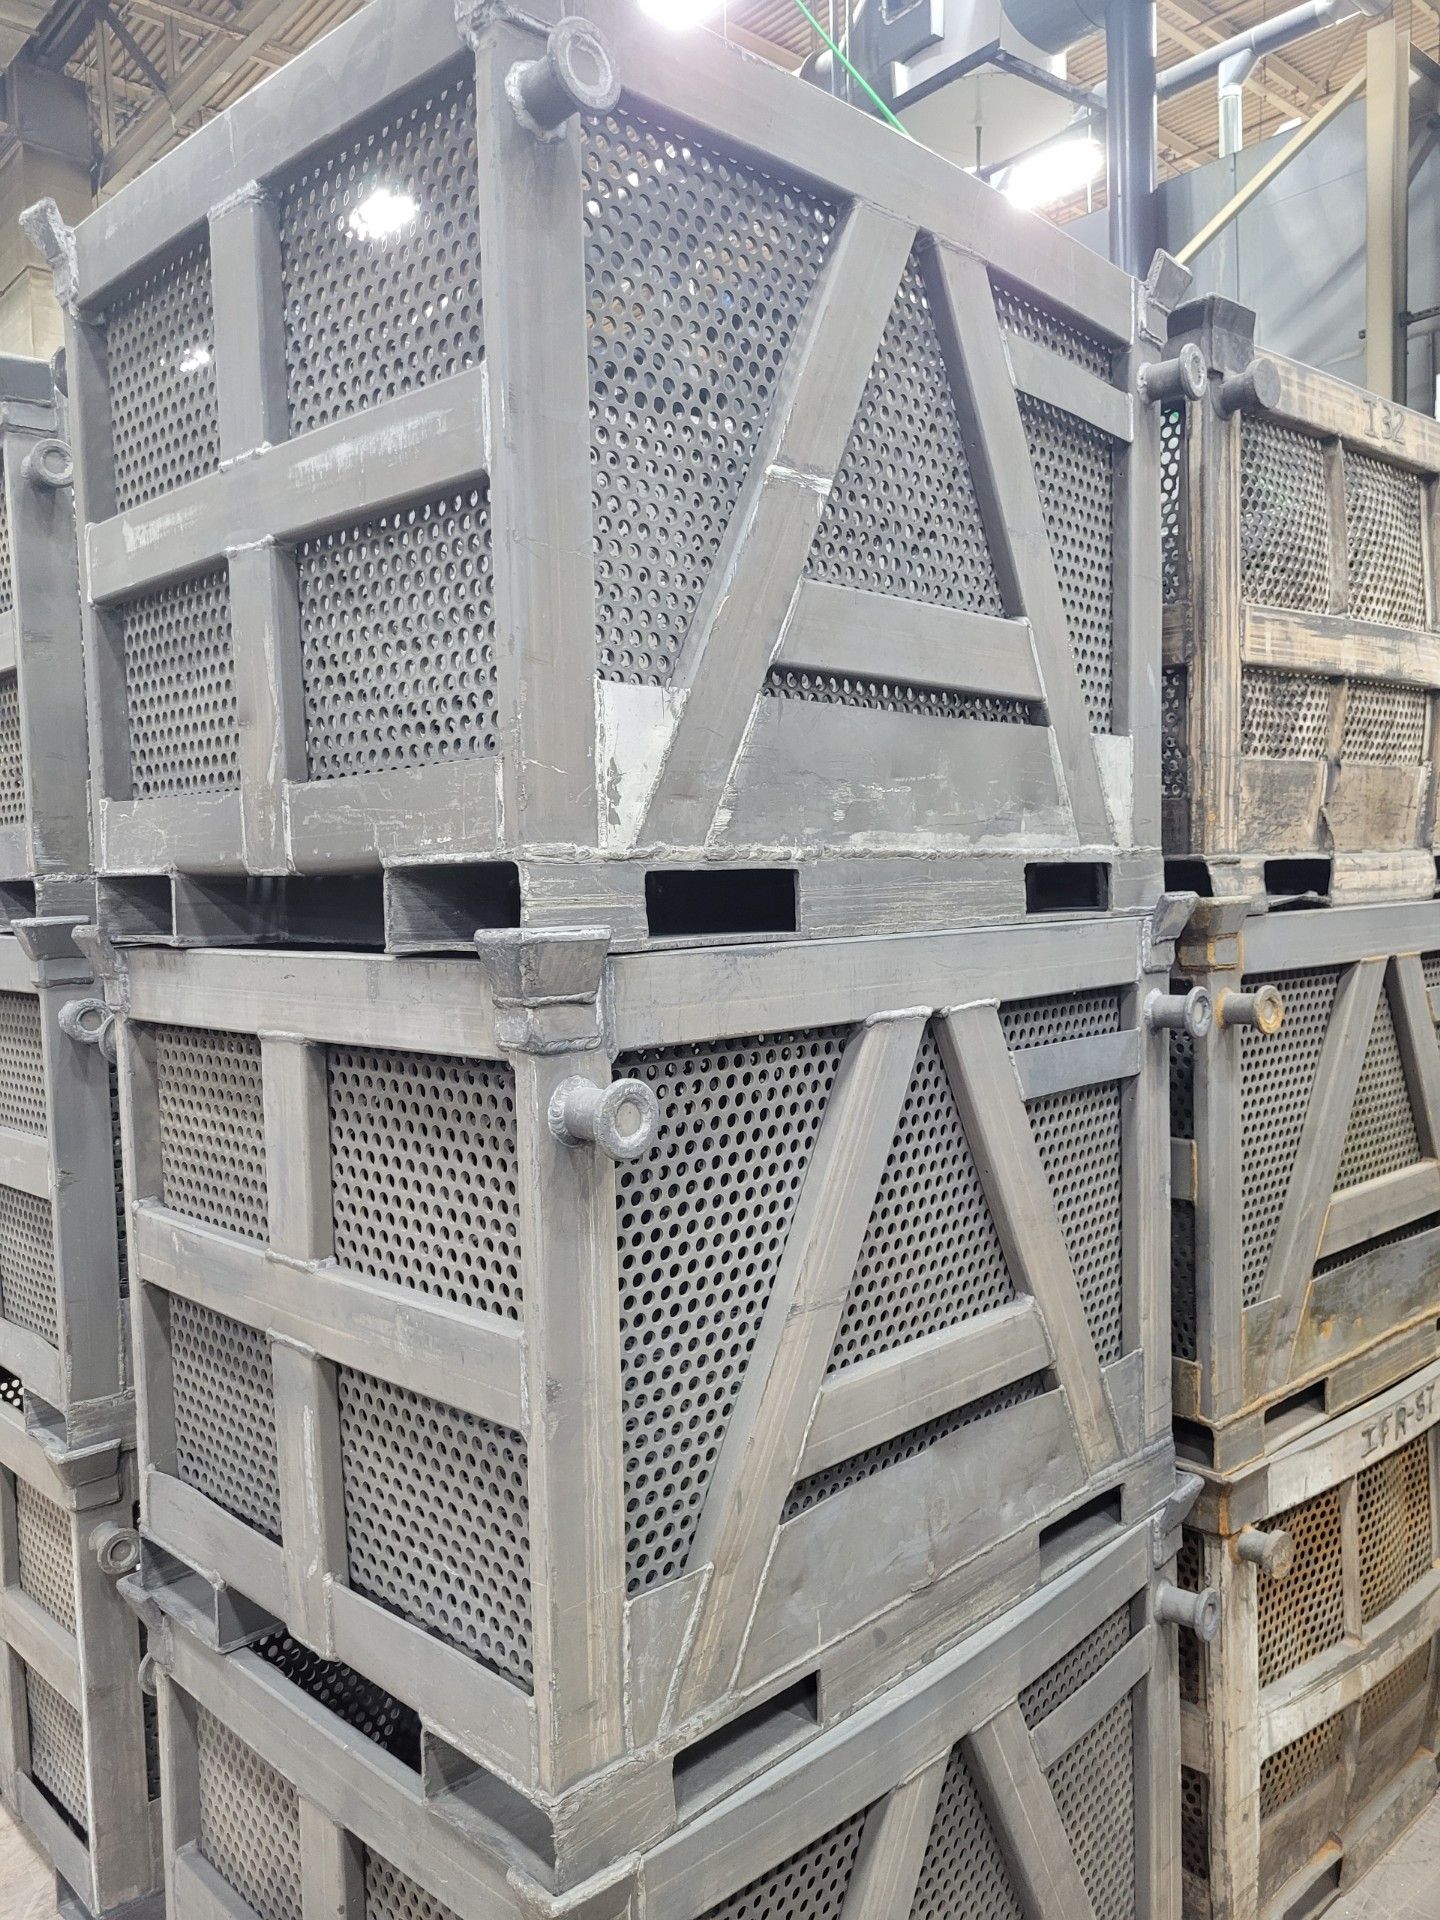 Lot of (180) Fabricated Steel Mesh Baskets